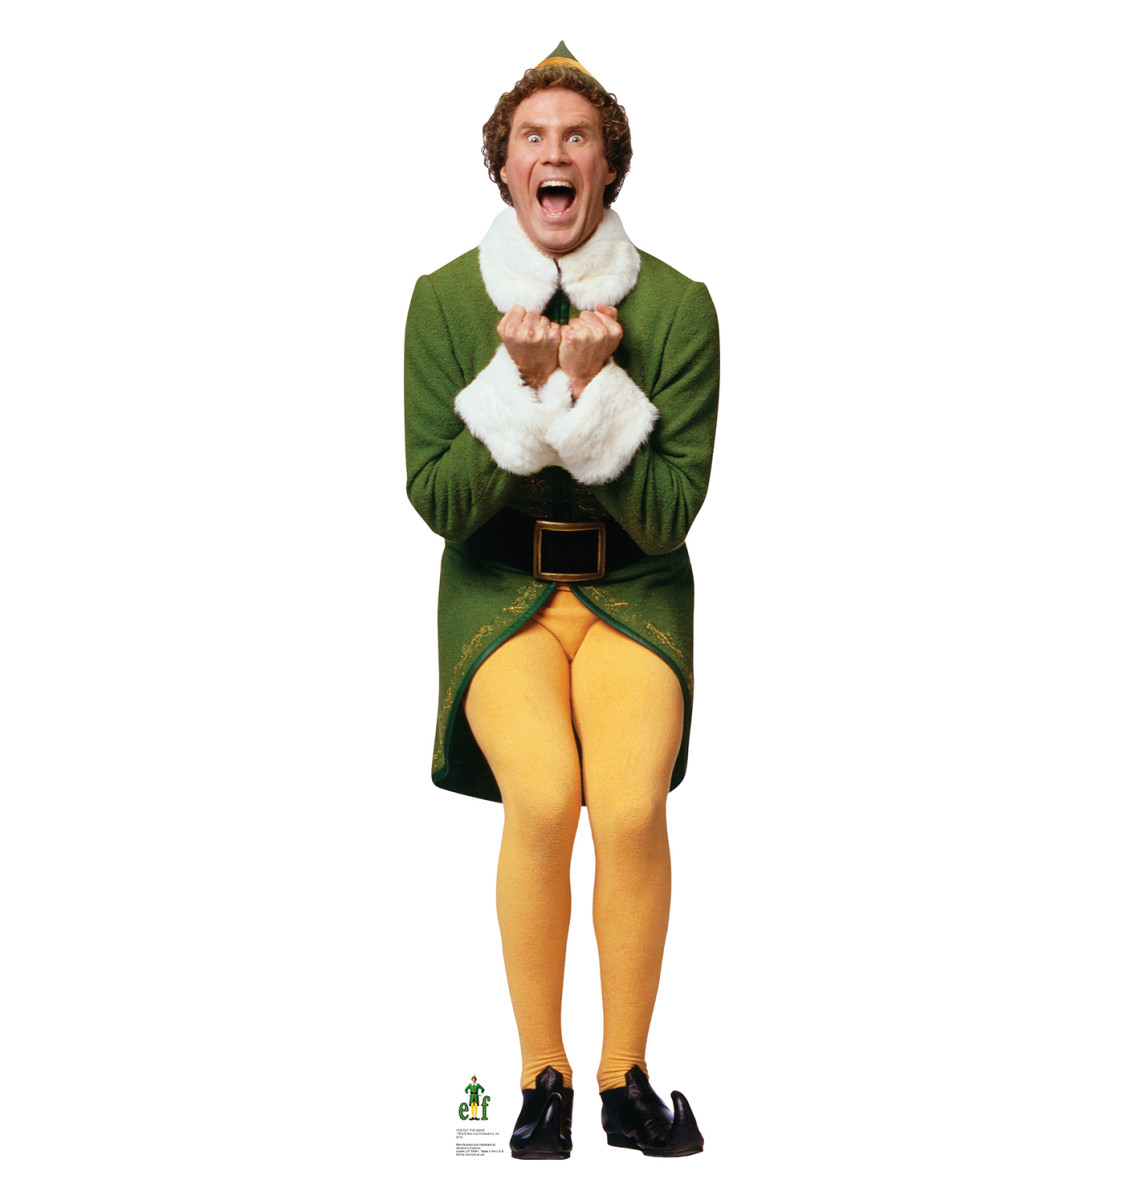 Buddy the elf in the movie ELF is excited